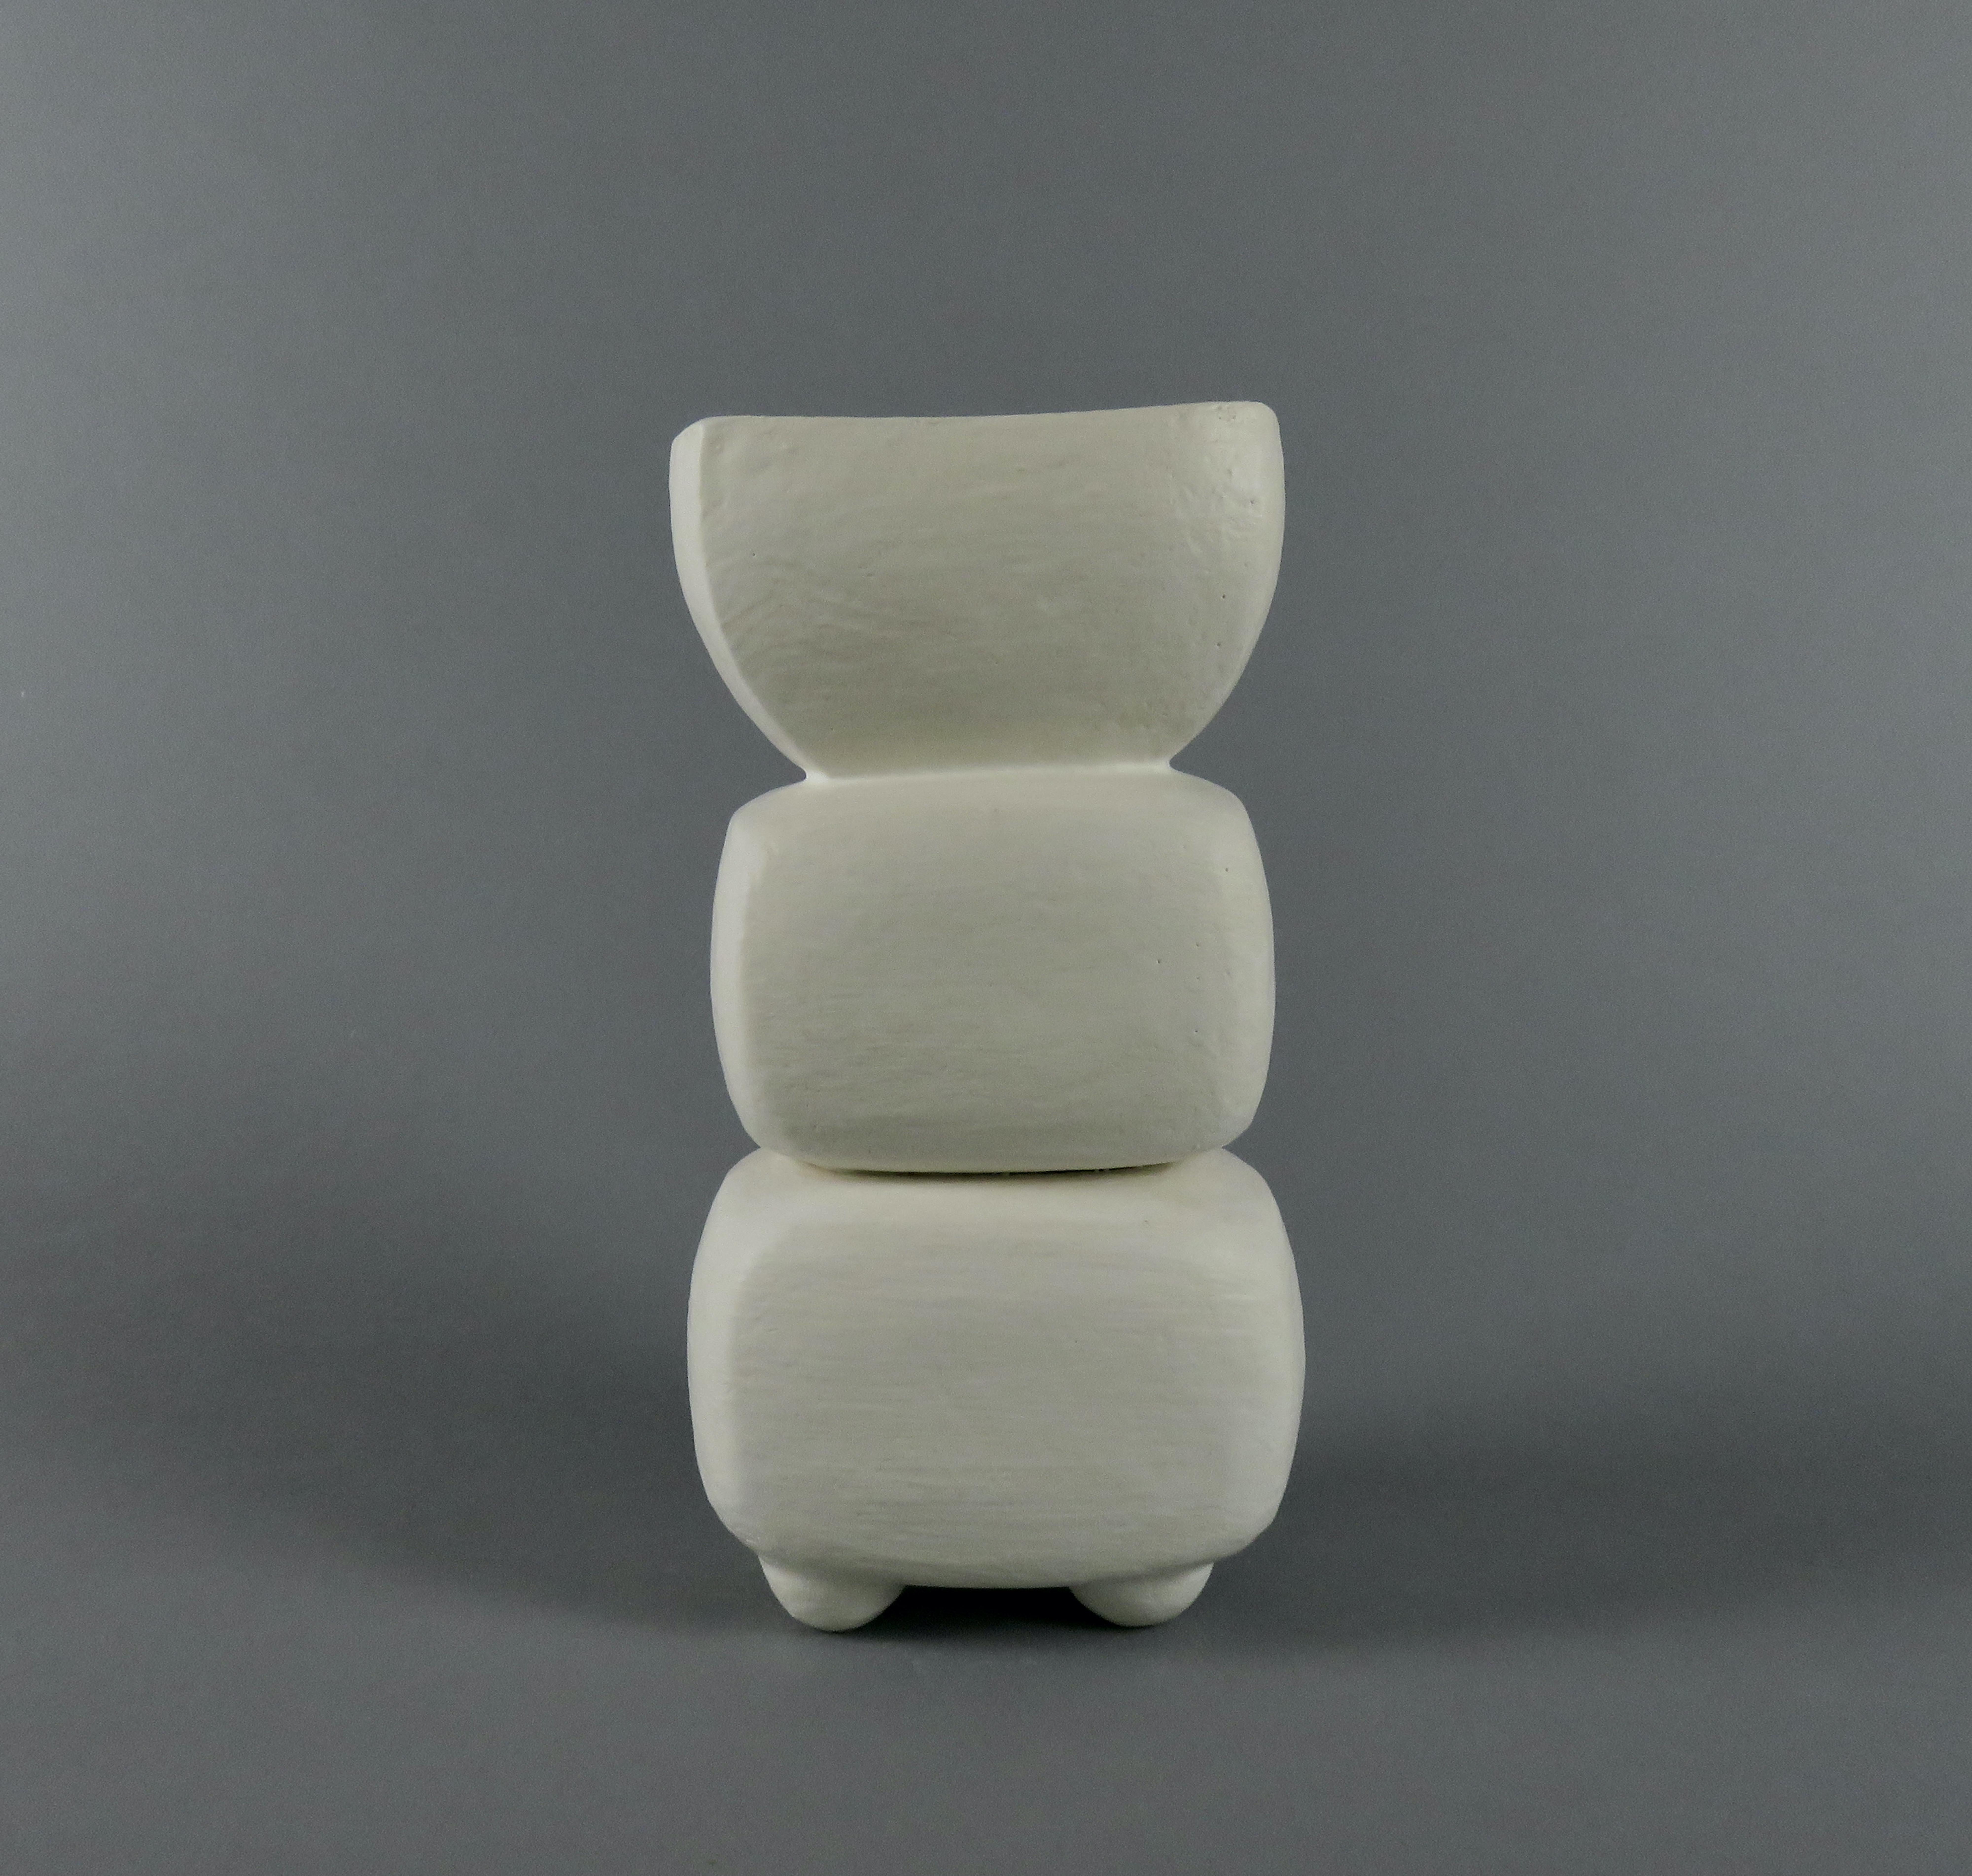 American Creamy White 3-Part Totem, Rectangular Cup on Top, Hand Built Ceramic Sculpture For Sale